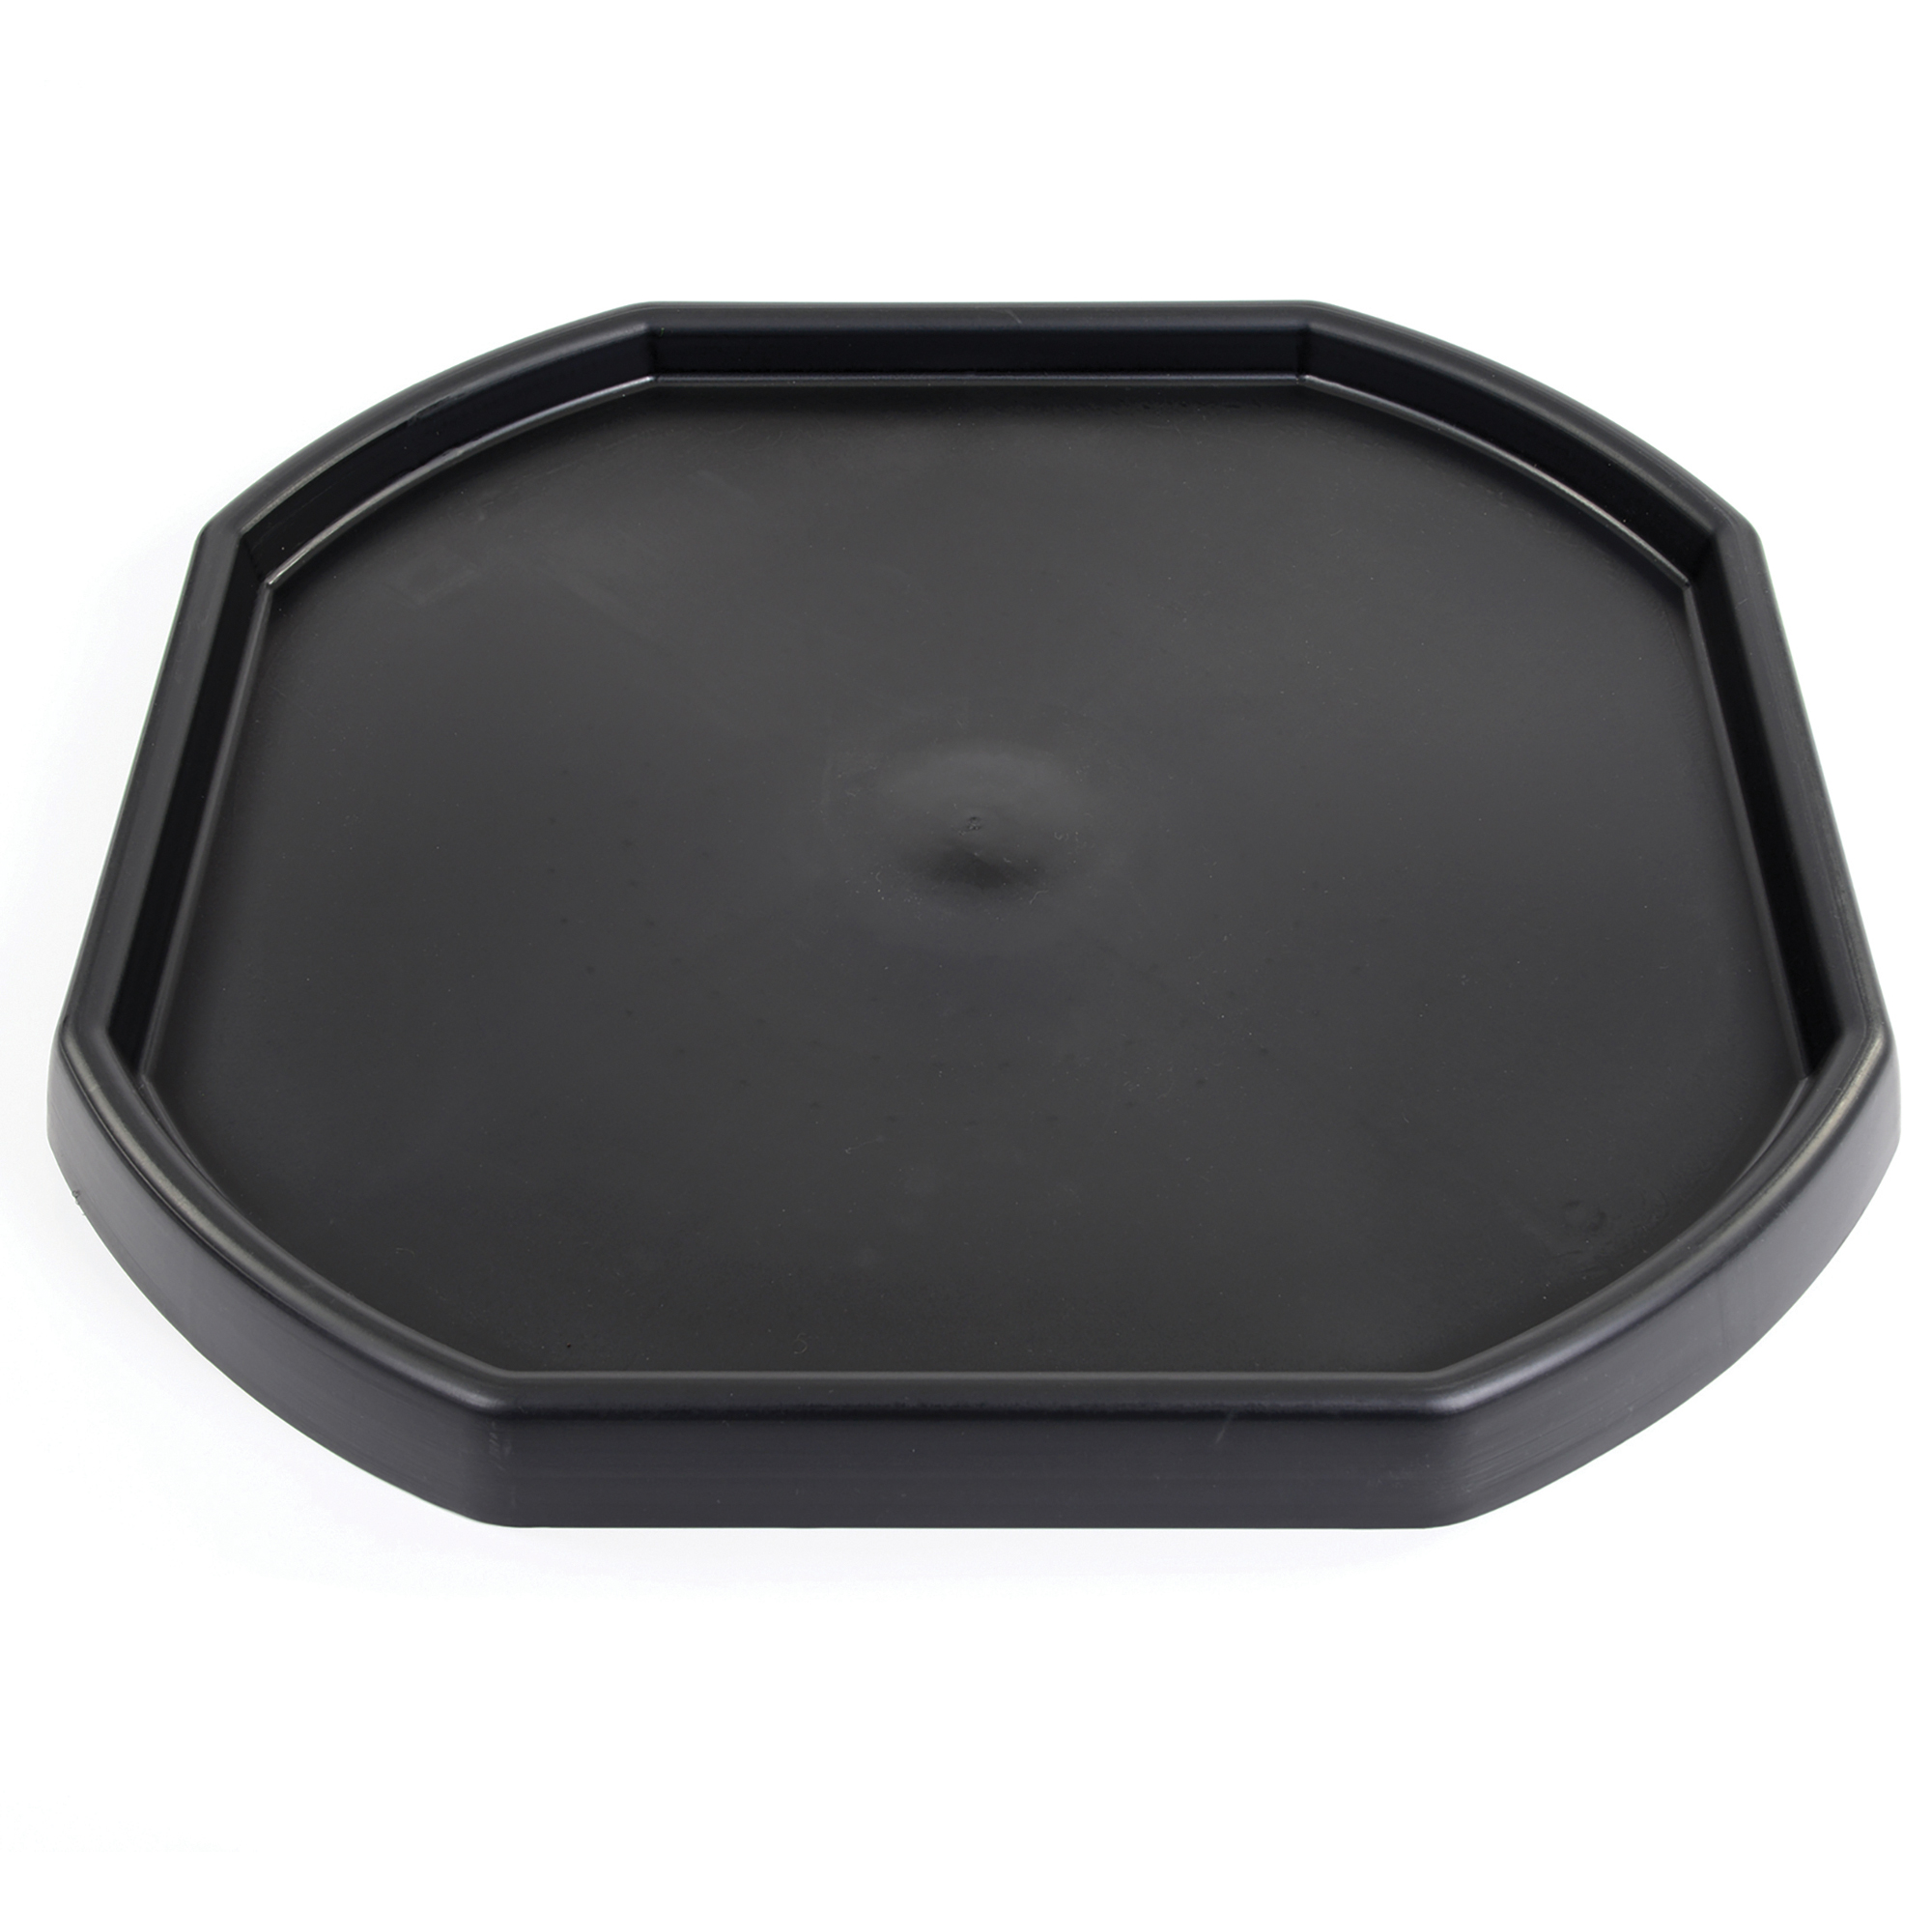 https://www.earlyexcellence.shop/images/product/source/early-excellence-large-octagonal-tray-odst16-large.jpg?t=1675785939